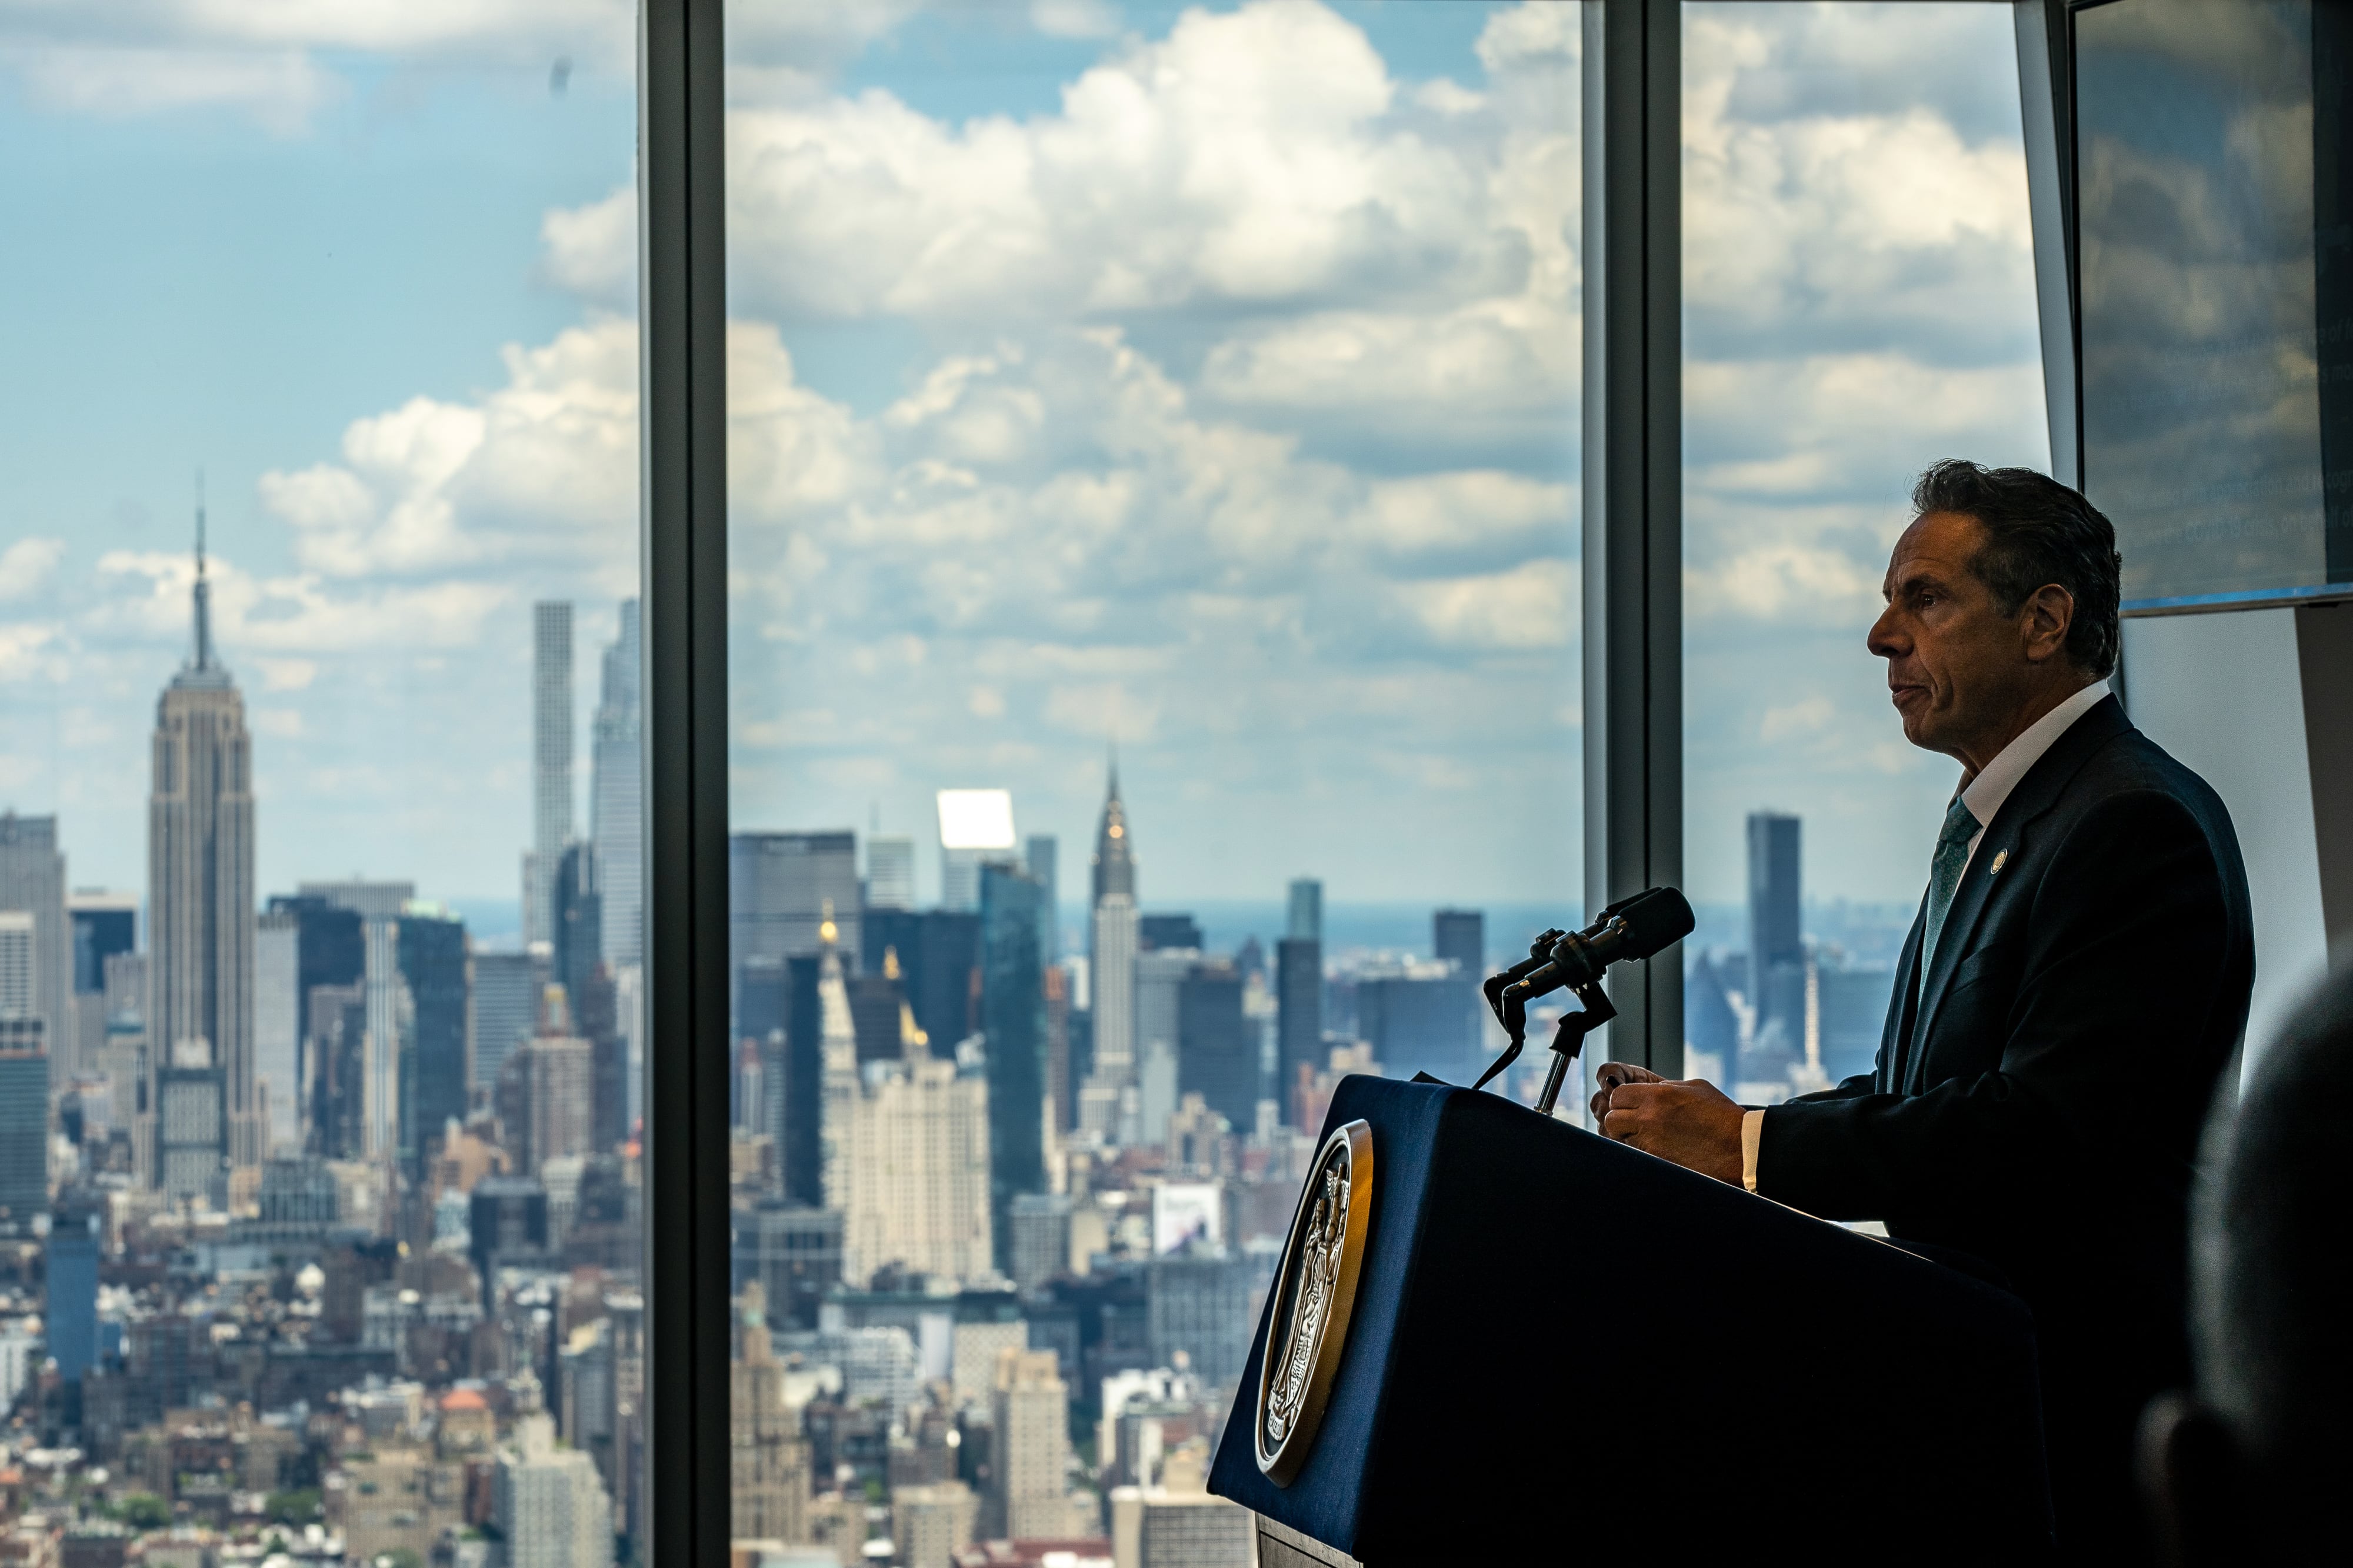 New York Governor Andrew Cuomo speaks at a podium indoors, with the New York City skyline visible behind the windows to his right.